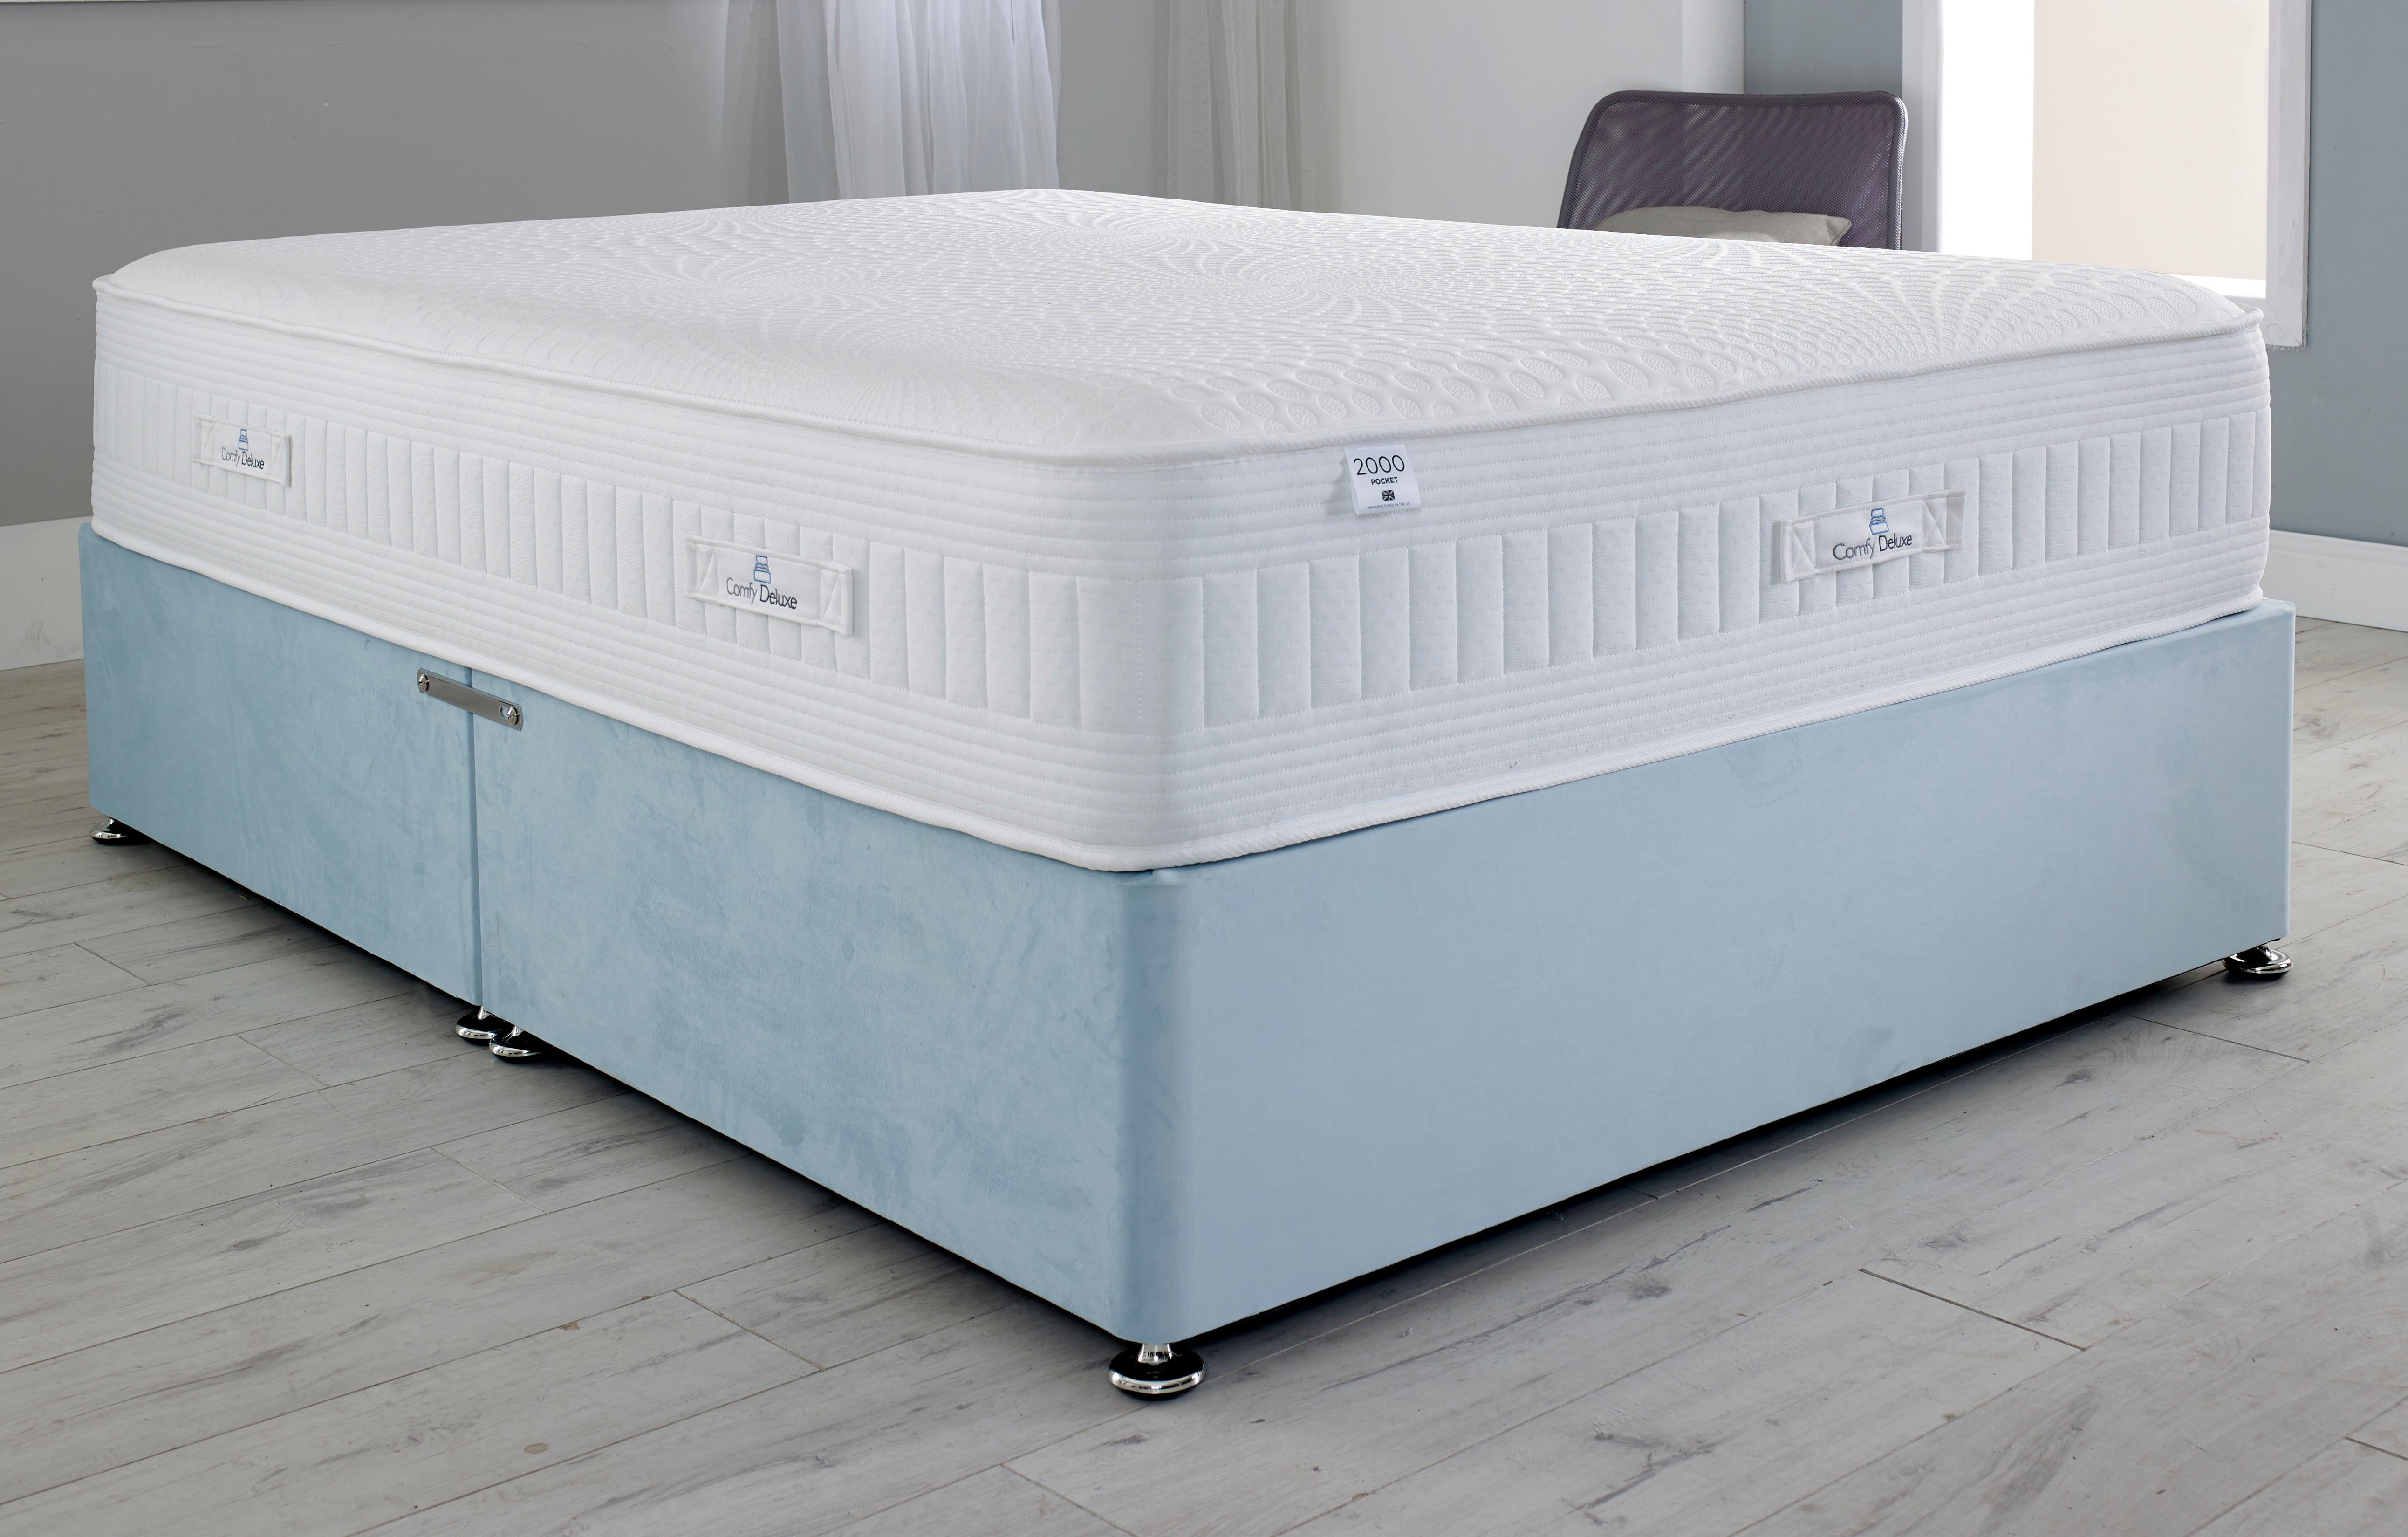 Lilly Pocket Cool Blue Encapsulated Mattress